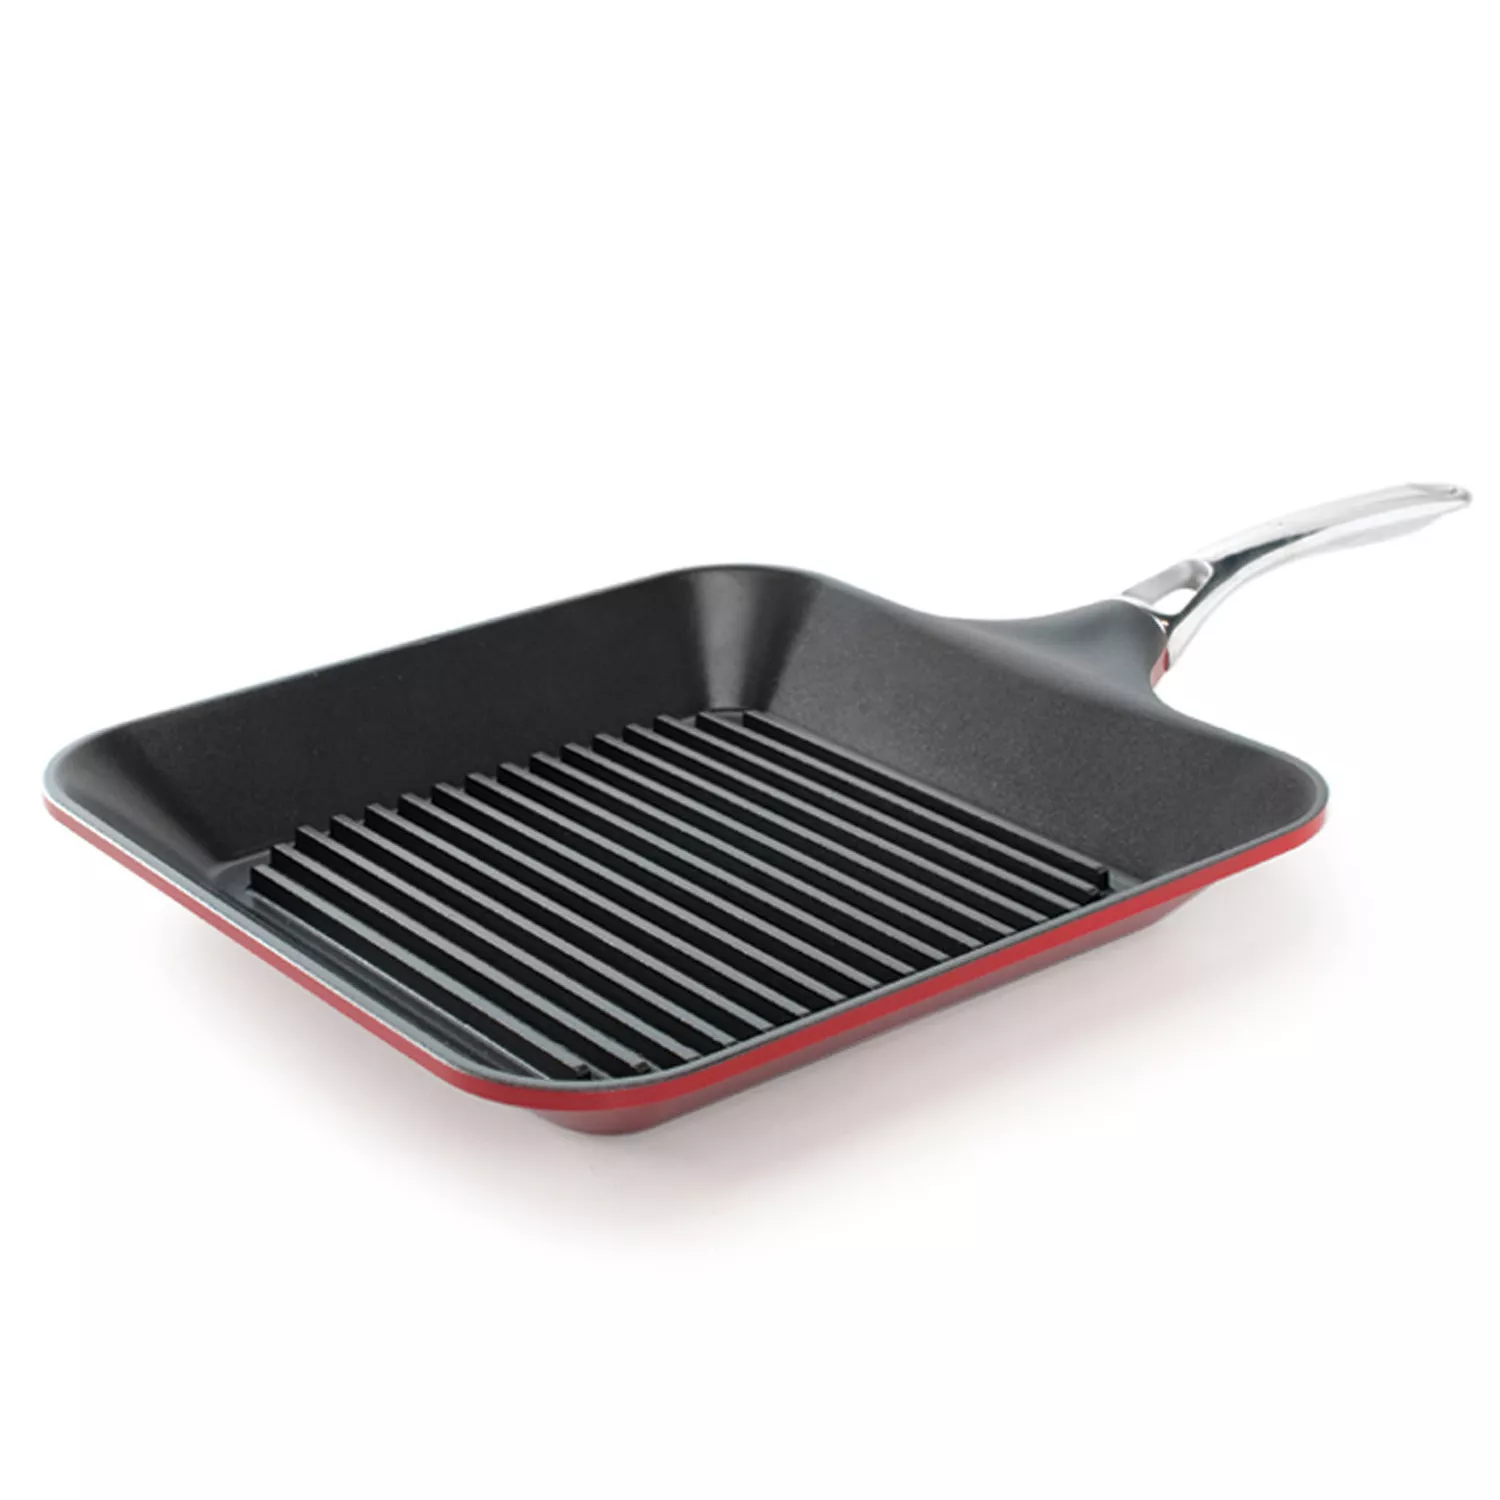 Nordic Ware 11 Grill Pan with Stainless Steel Handle - Red